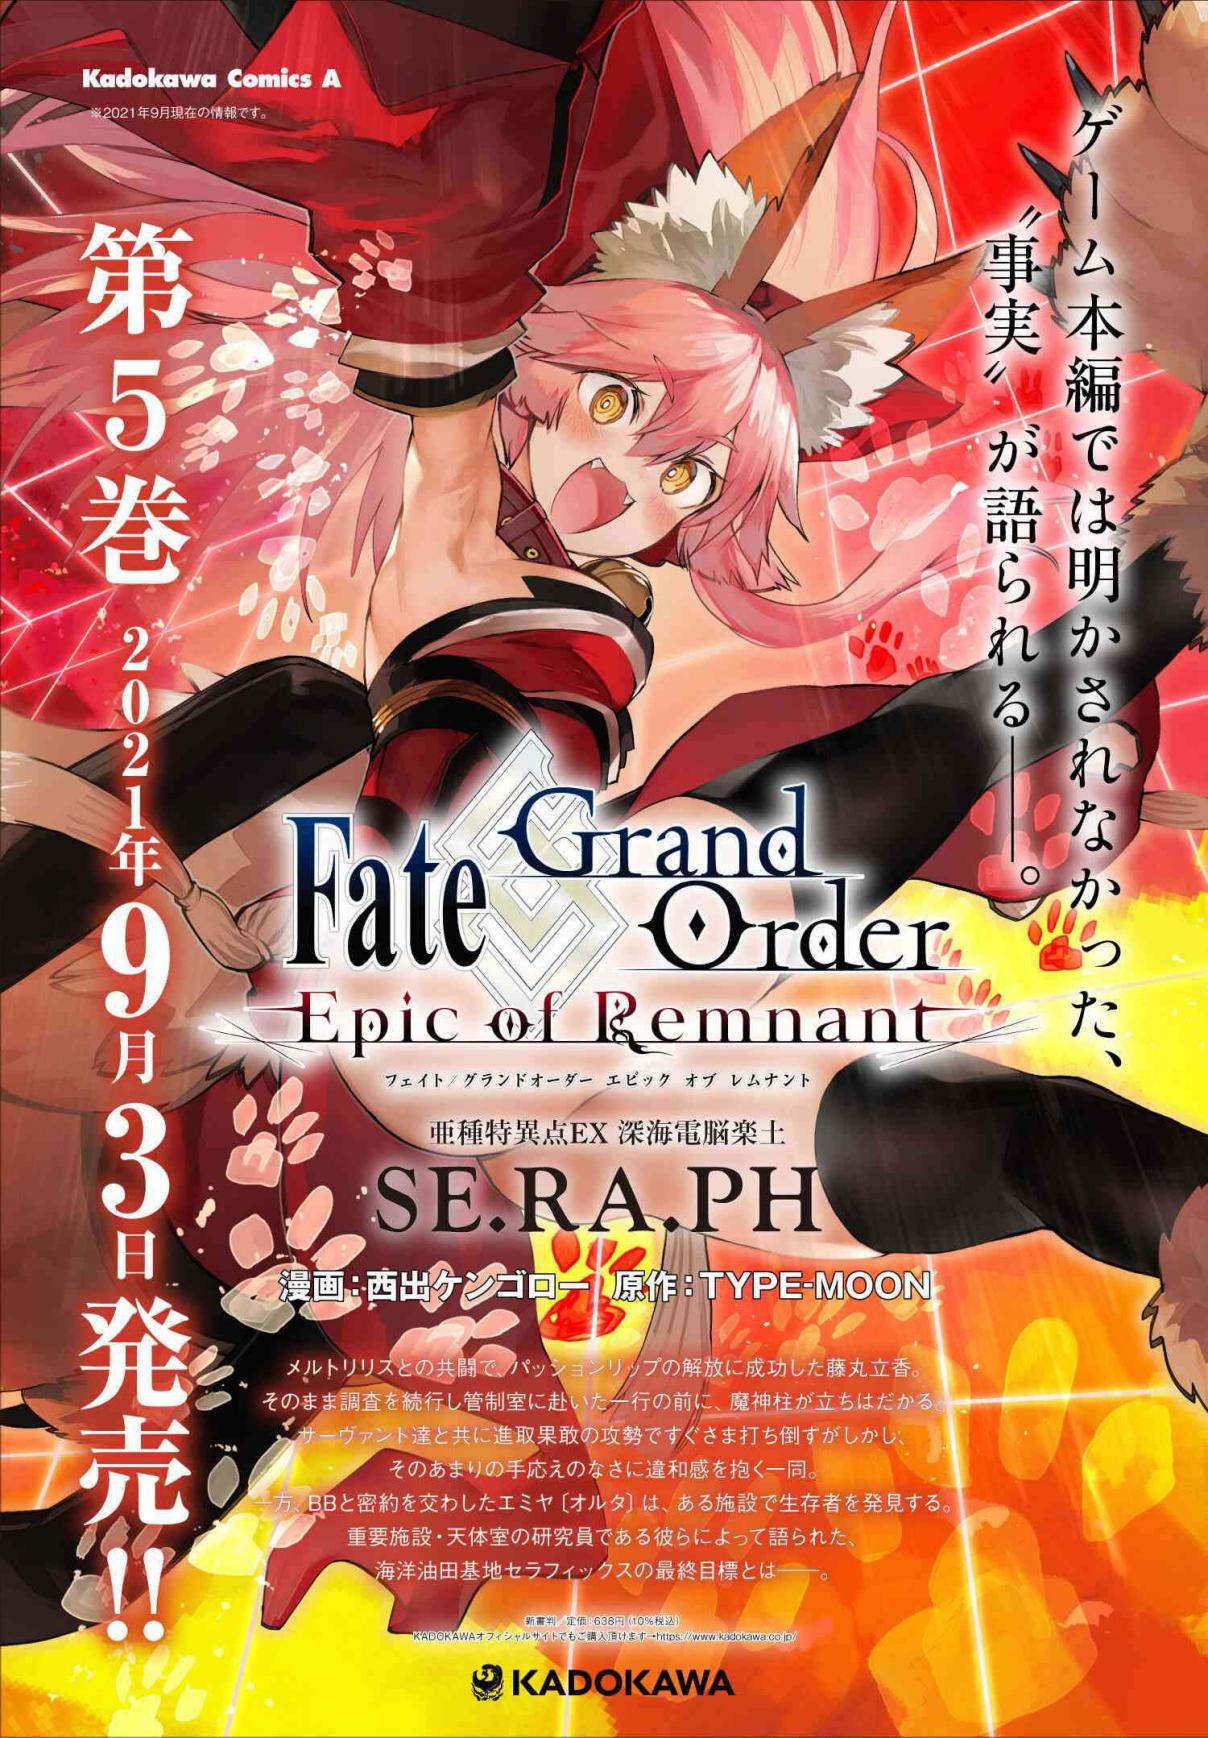 Fate/Grand Order: Epic of Remnant - Deep Sea Cyber-Paradise SE.RA.PH 25.2